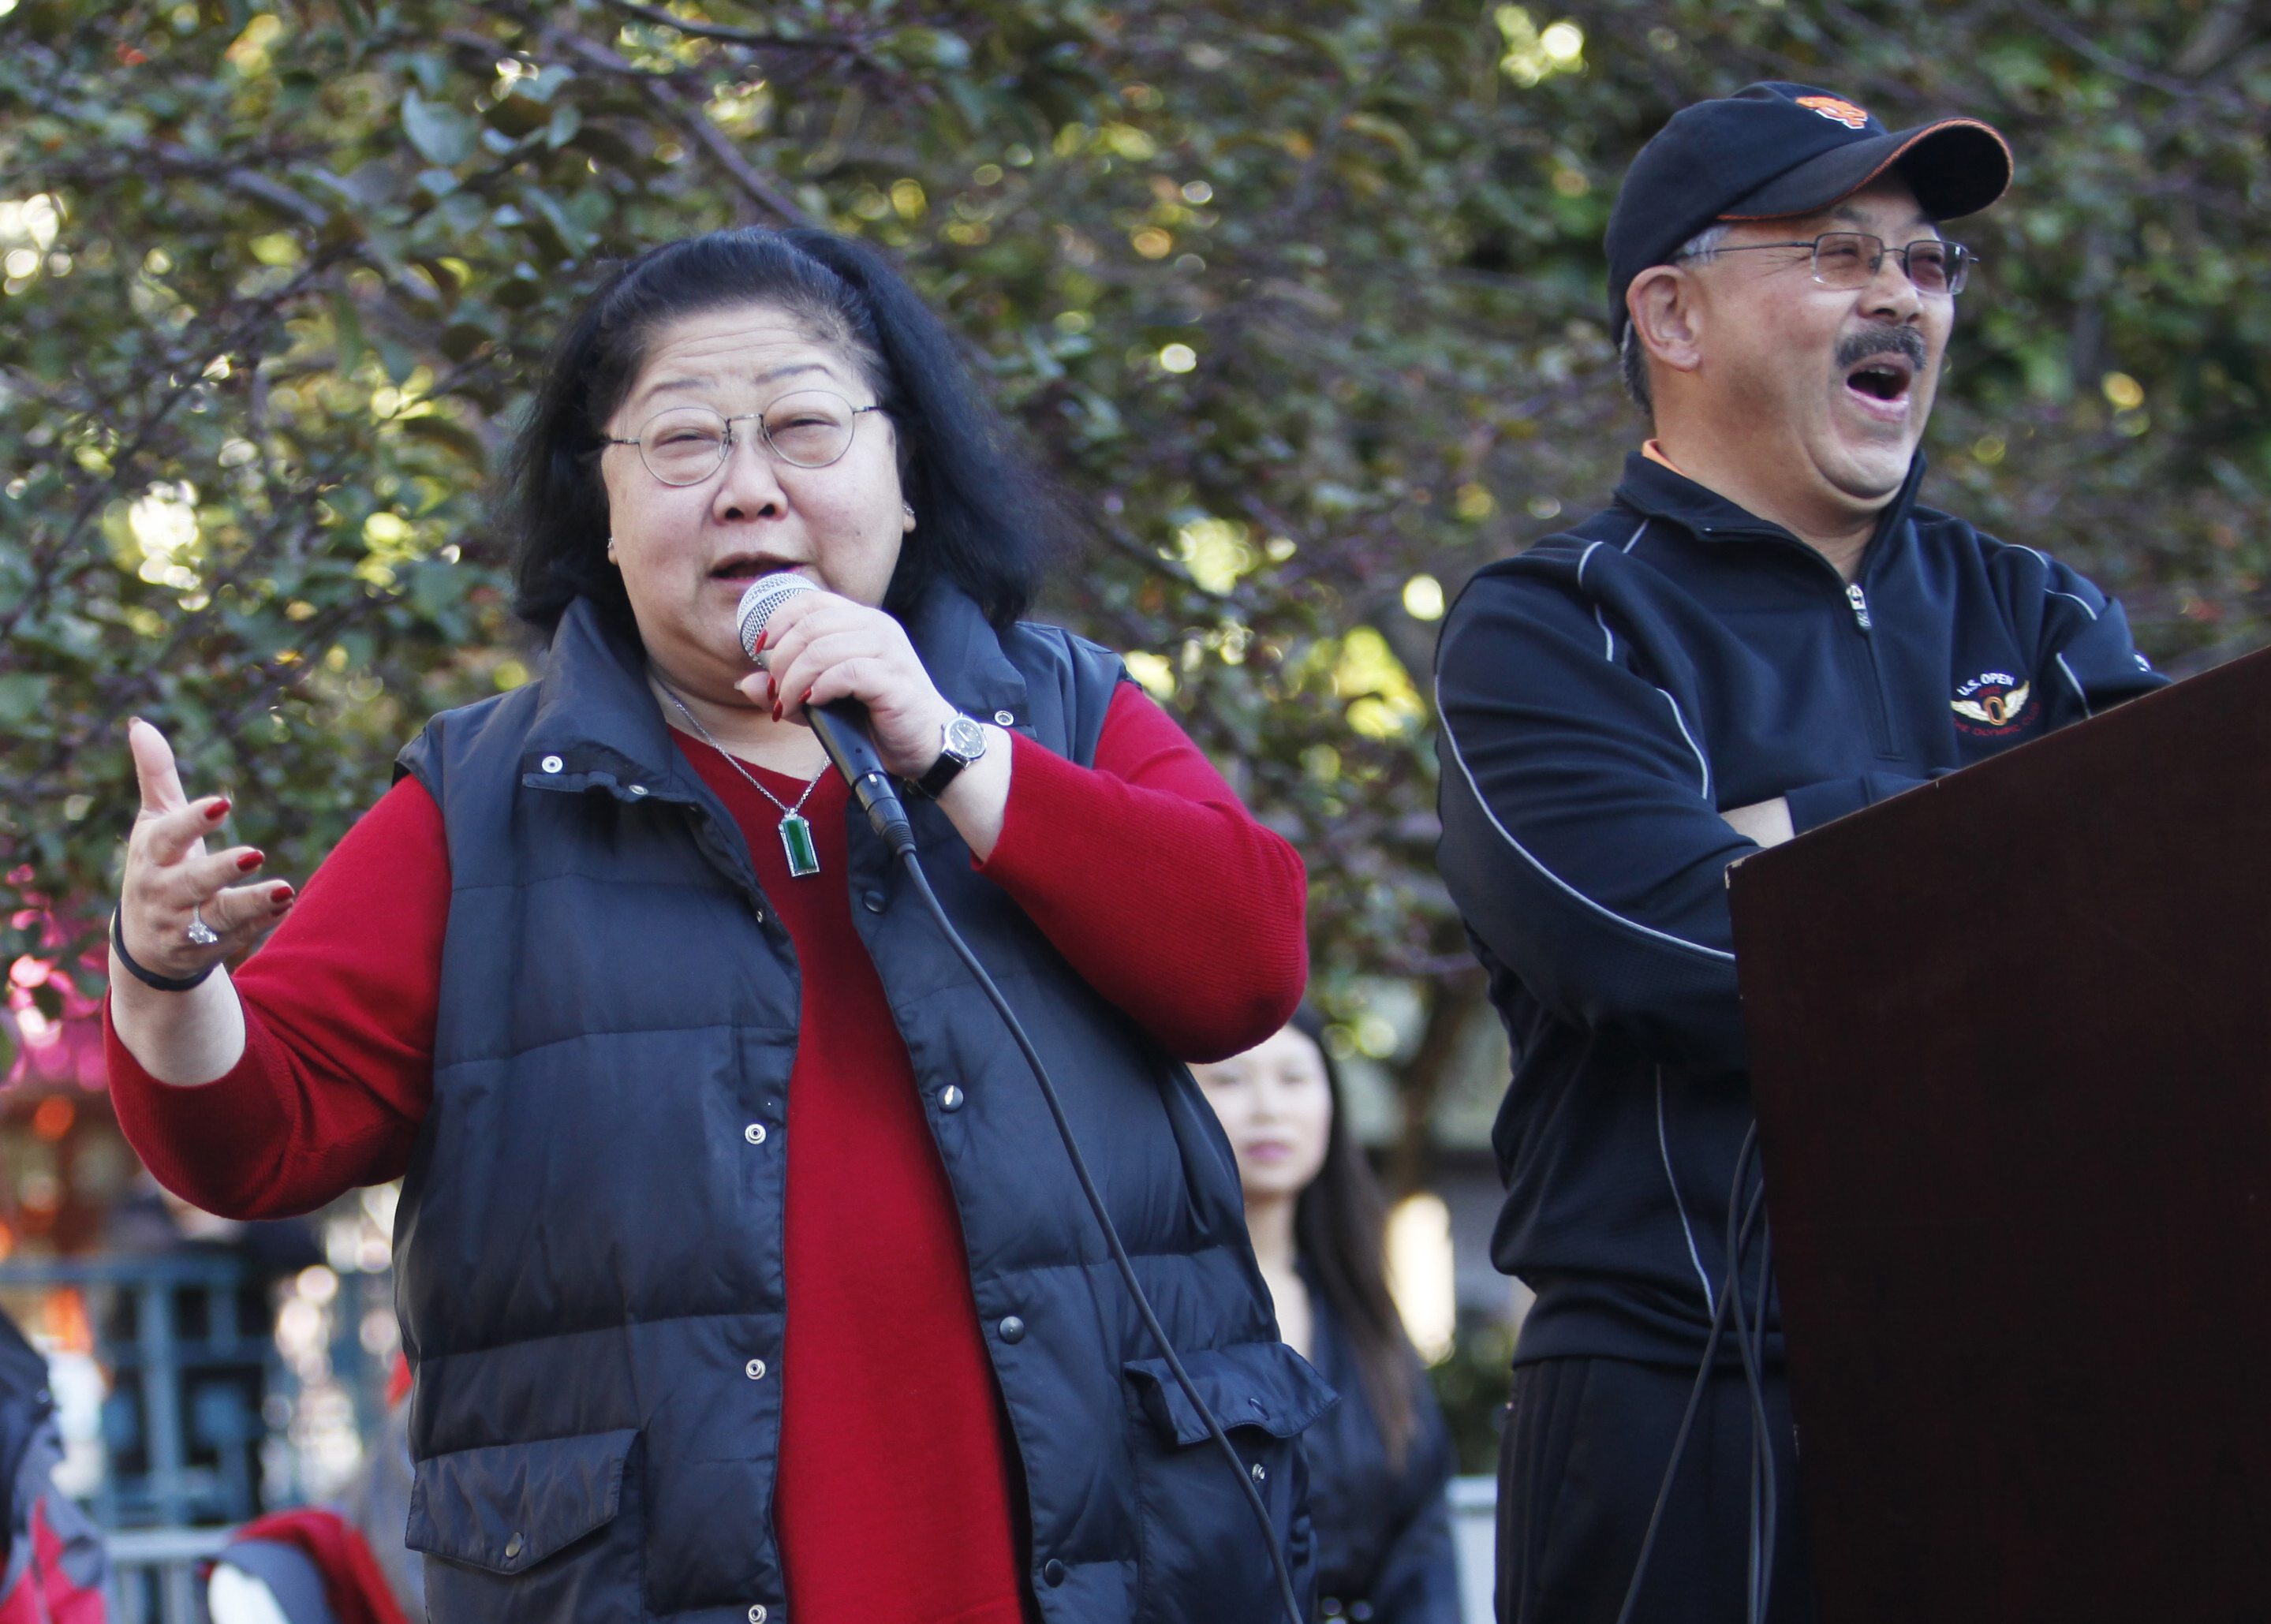 A woman speaks into a microphone, a smiling man beside her, with trees and a person in the background.